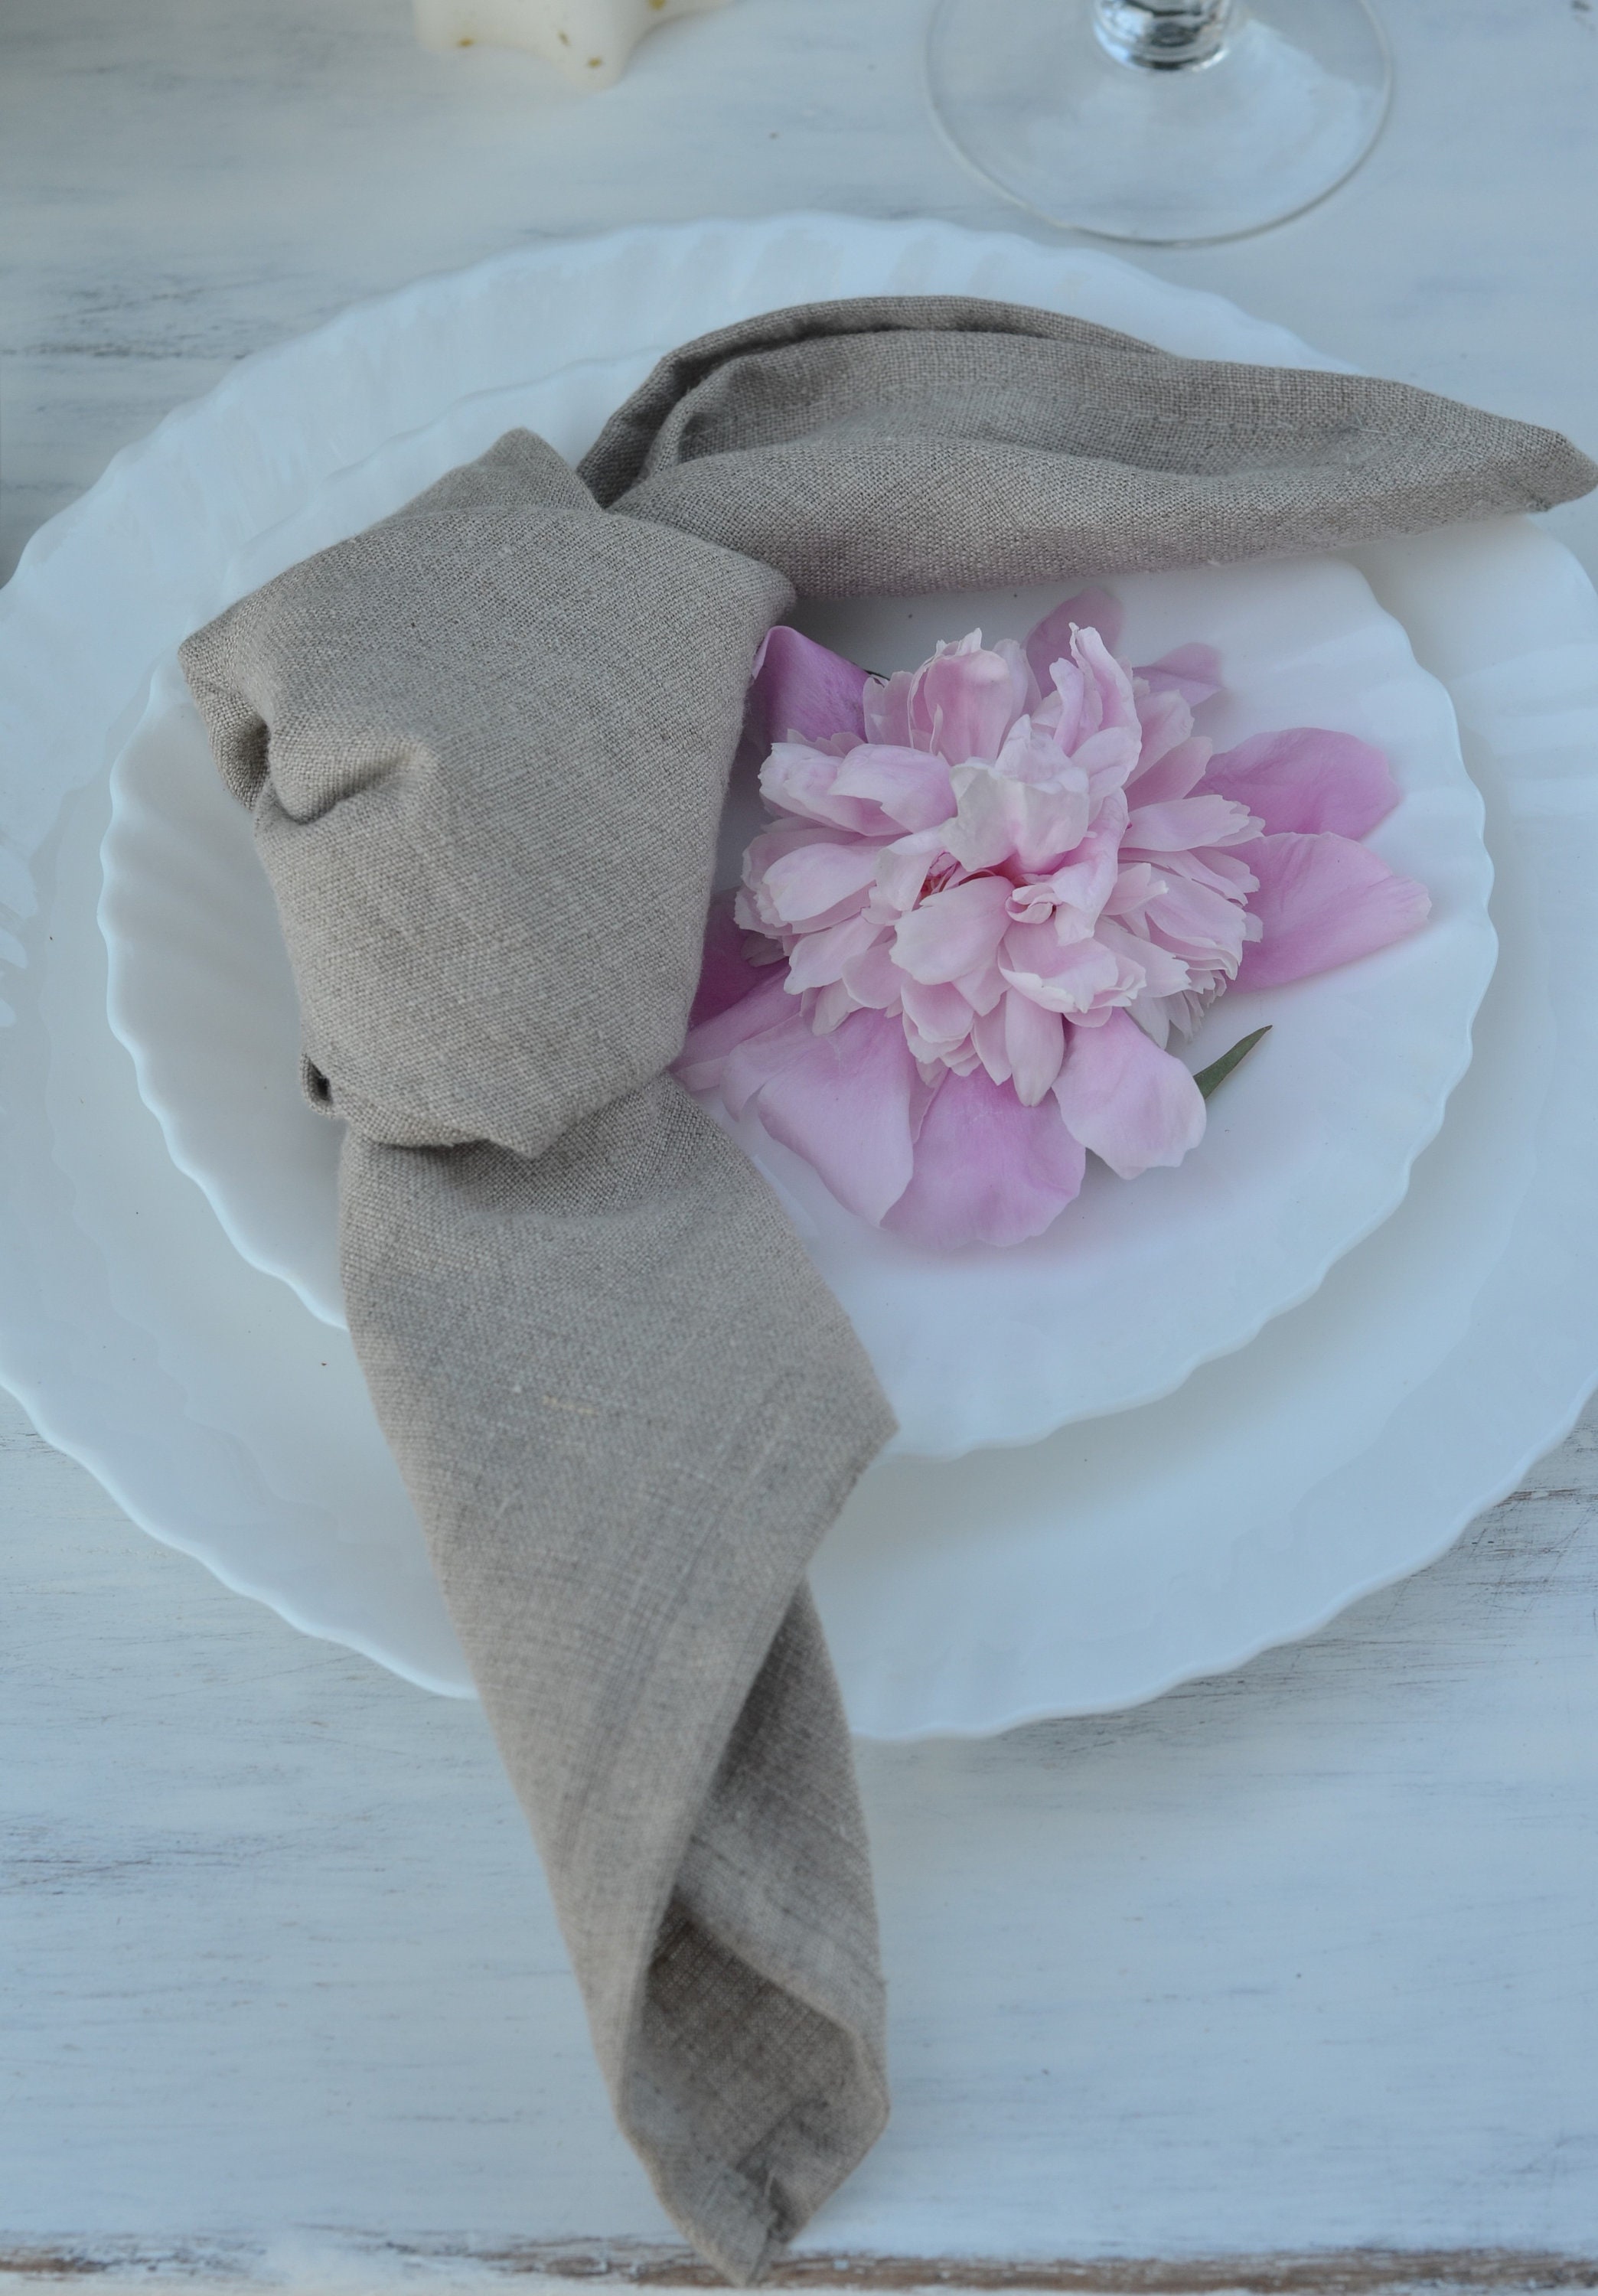 Flax Linen Cotton Cloth Dinner Napkin 18x18 with Lace 18x18 inch Linen,Wedding Napkins, Set of 12, Size: 18 x 18, Beige